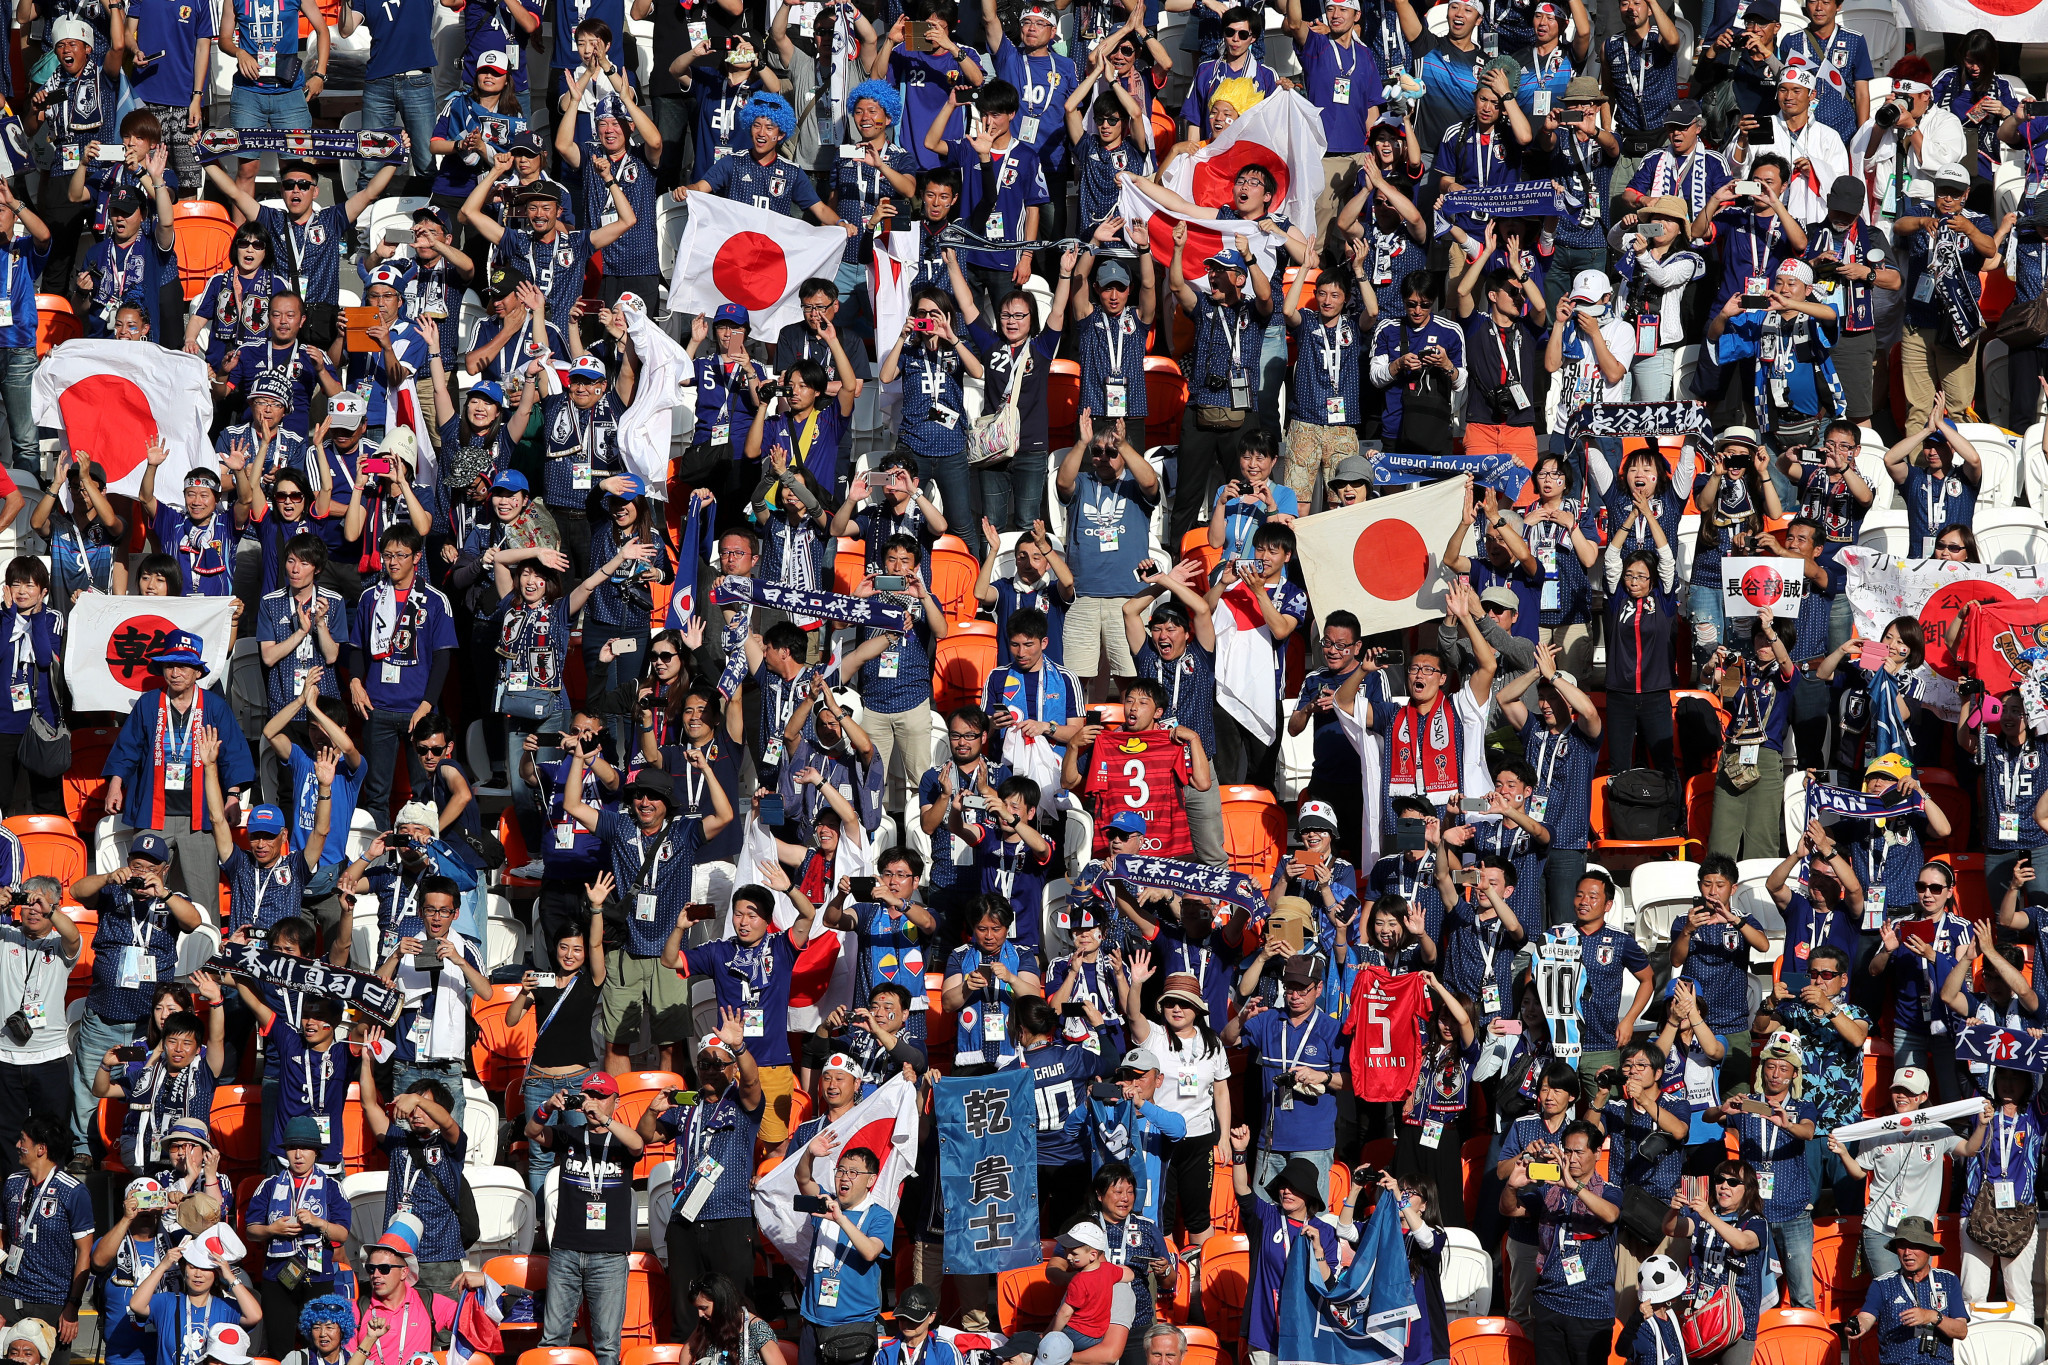 Japan fans celebrate their team's success ©Getty Images